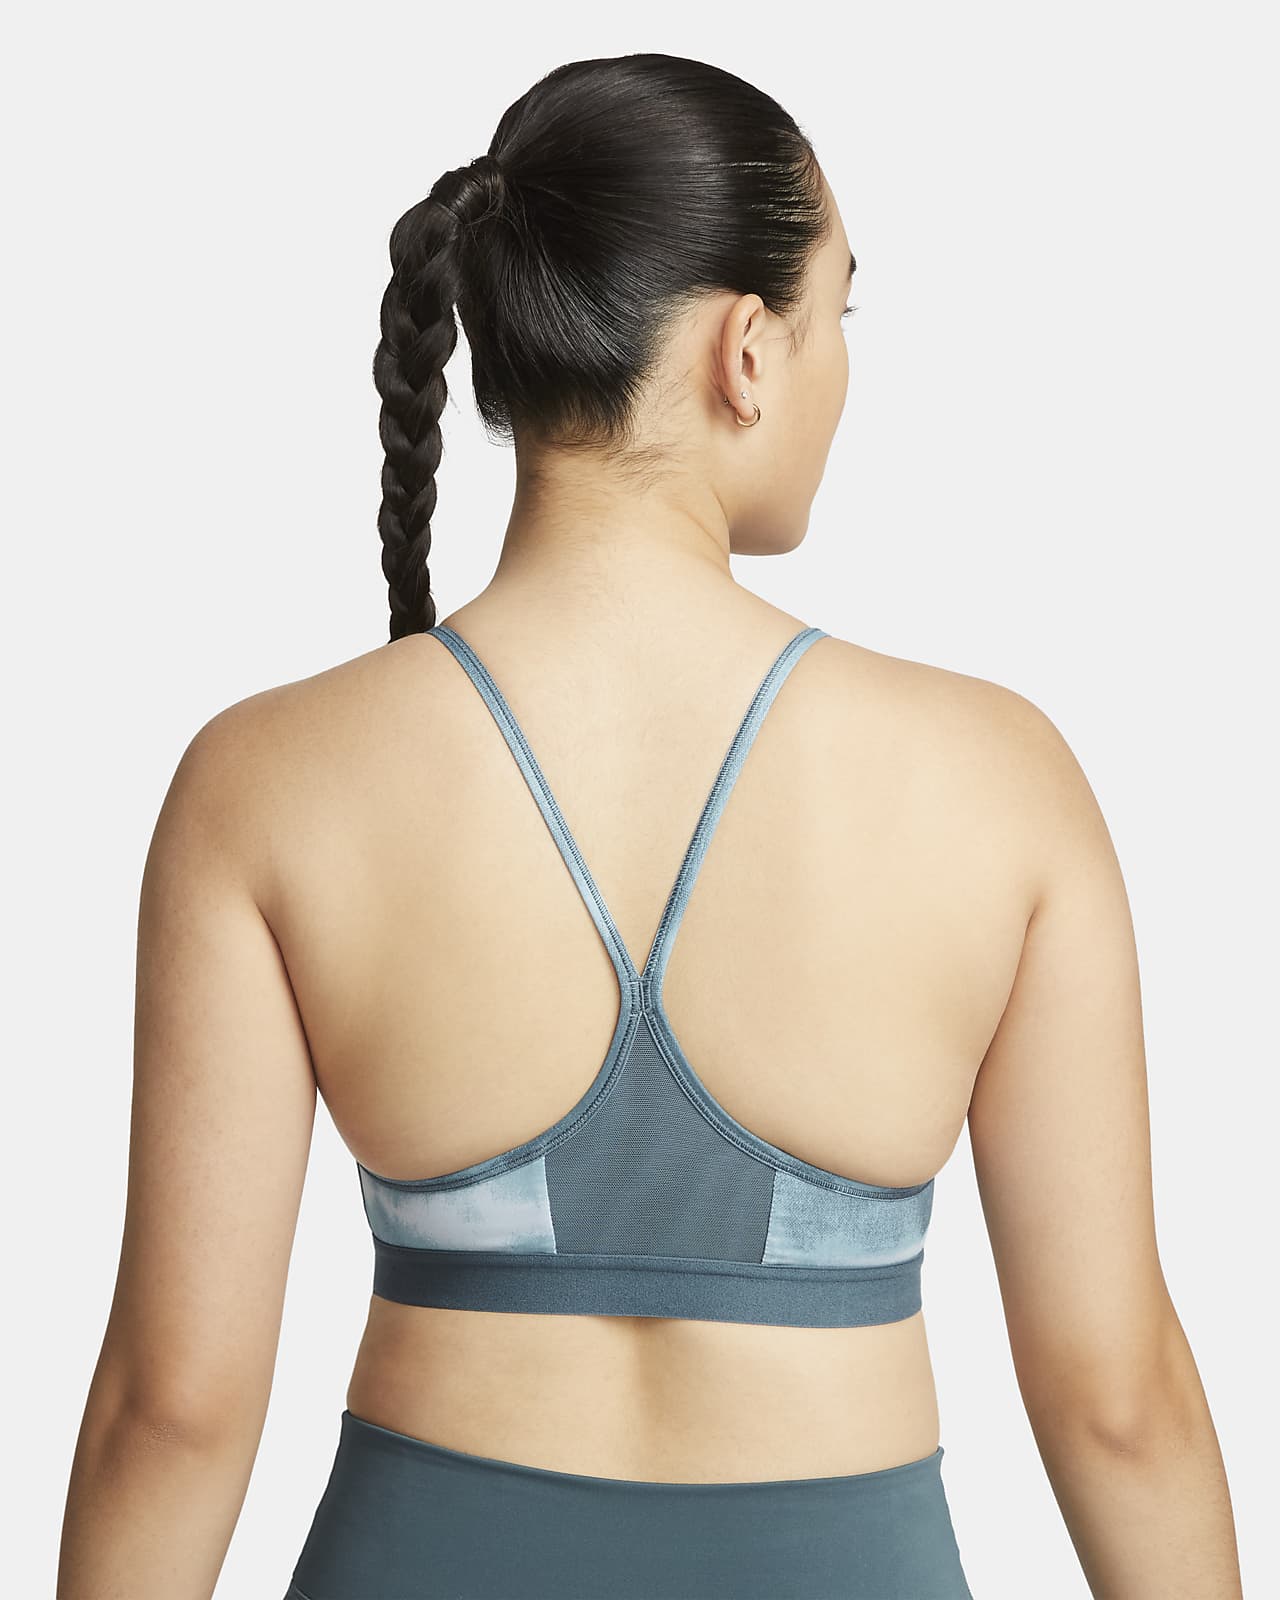 Nike Indy Women's Light-Support Padded All-Over Print Sports Bra